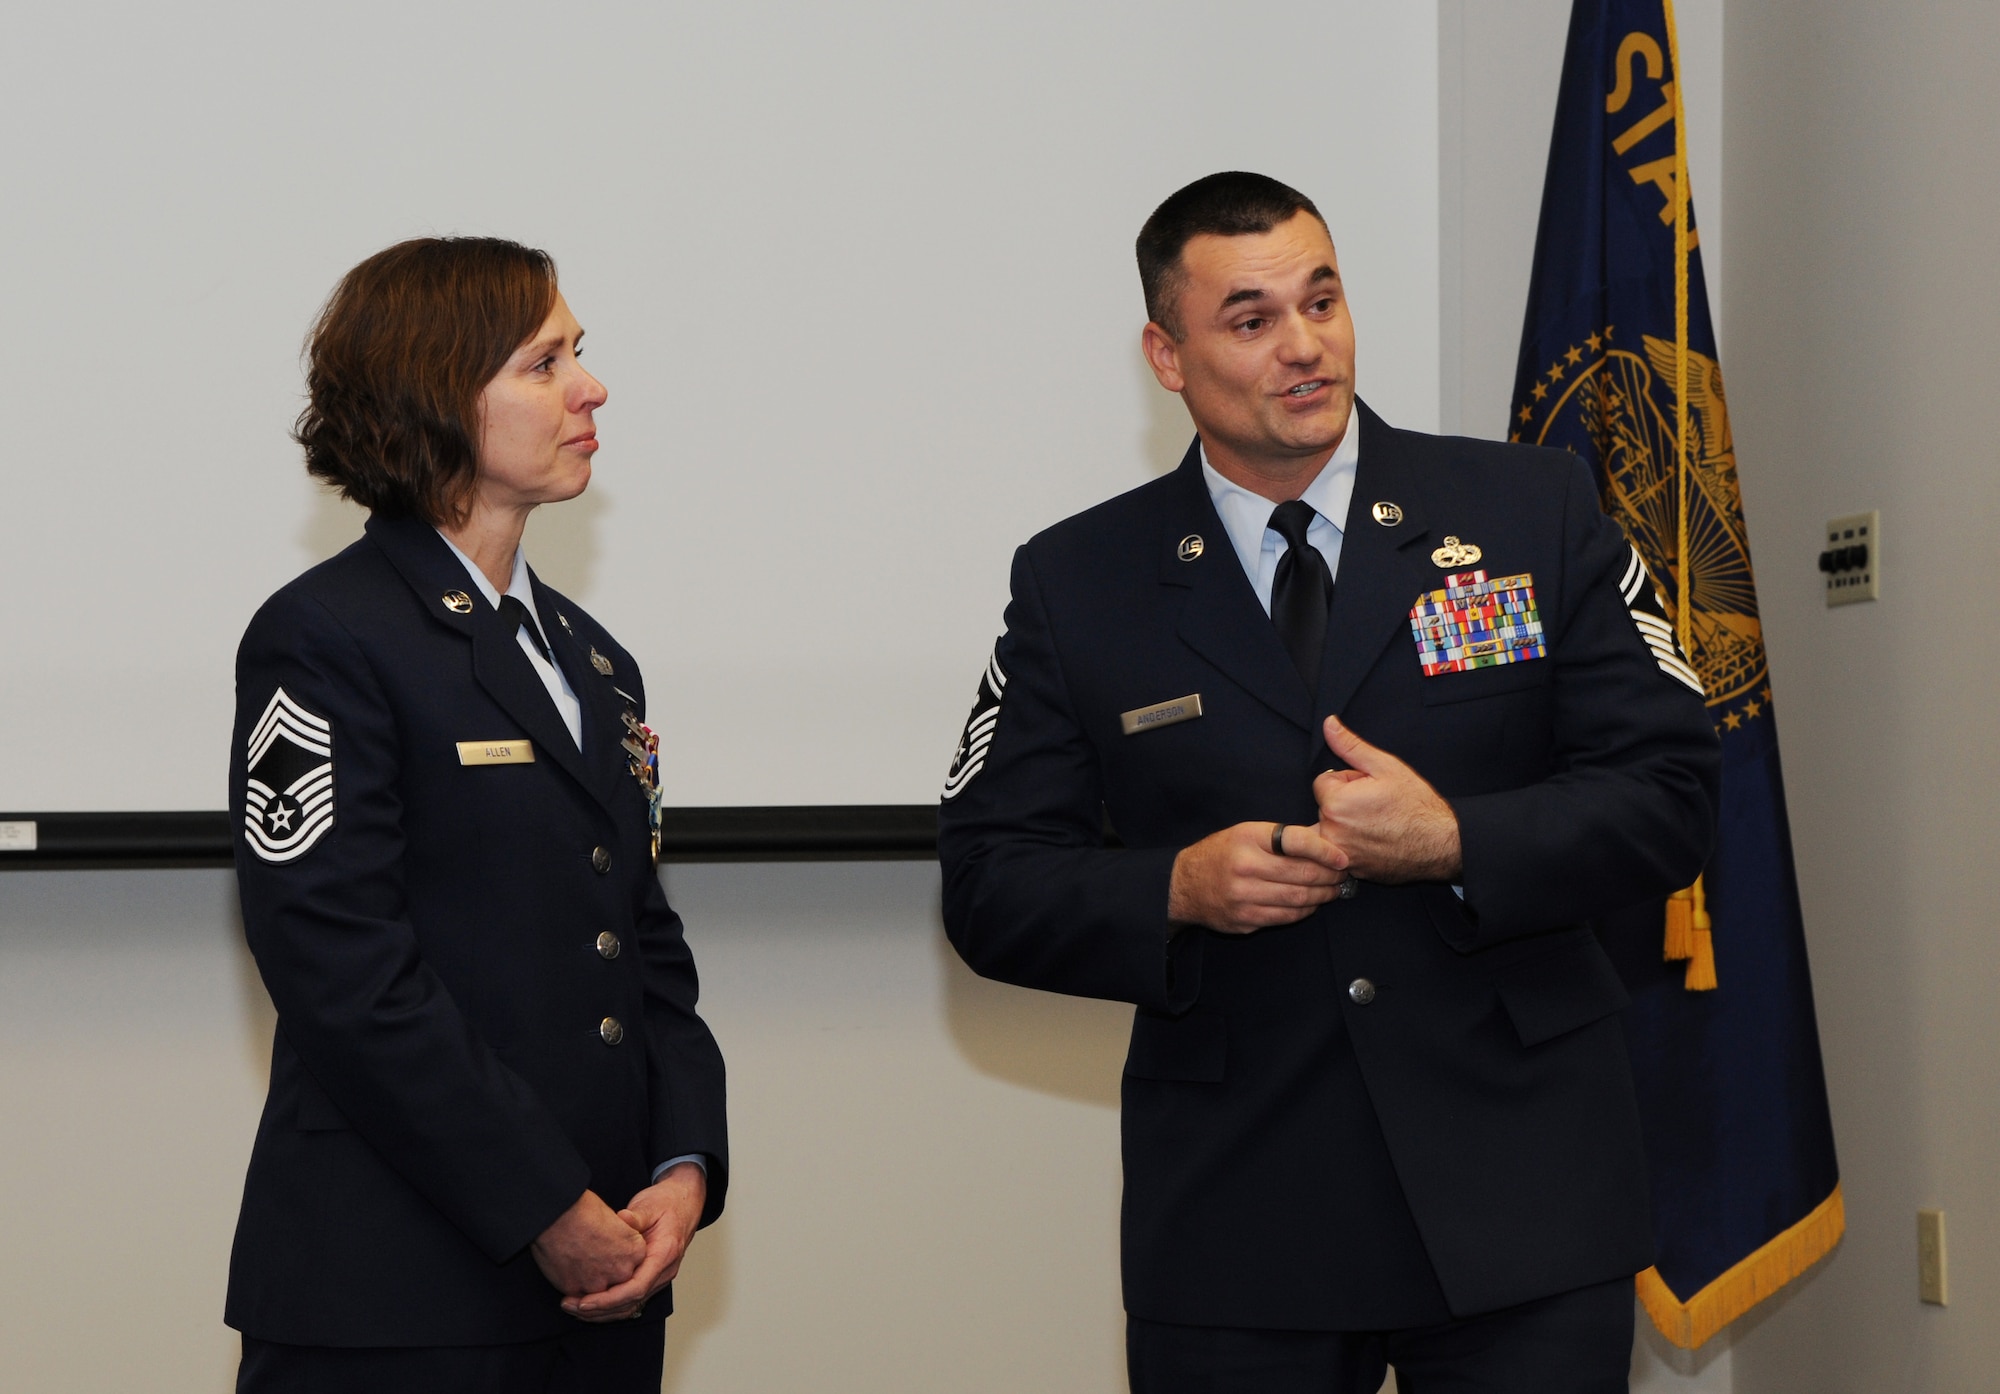 Chief Master Sgt. Jean Allen, left, listens to her son, Air Force Senior Master Sgt. Jason Anderson, right, address those attending her retirement ceremony, Dec. 22, 2015, Portland Air National Guard Base, Ore. (Air National Guard photo by Tech. Sgt. John Hughel, 142nd Fighter Wing Public Affairs)